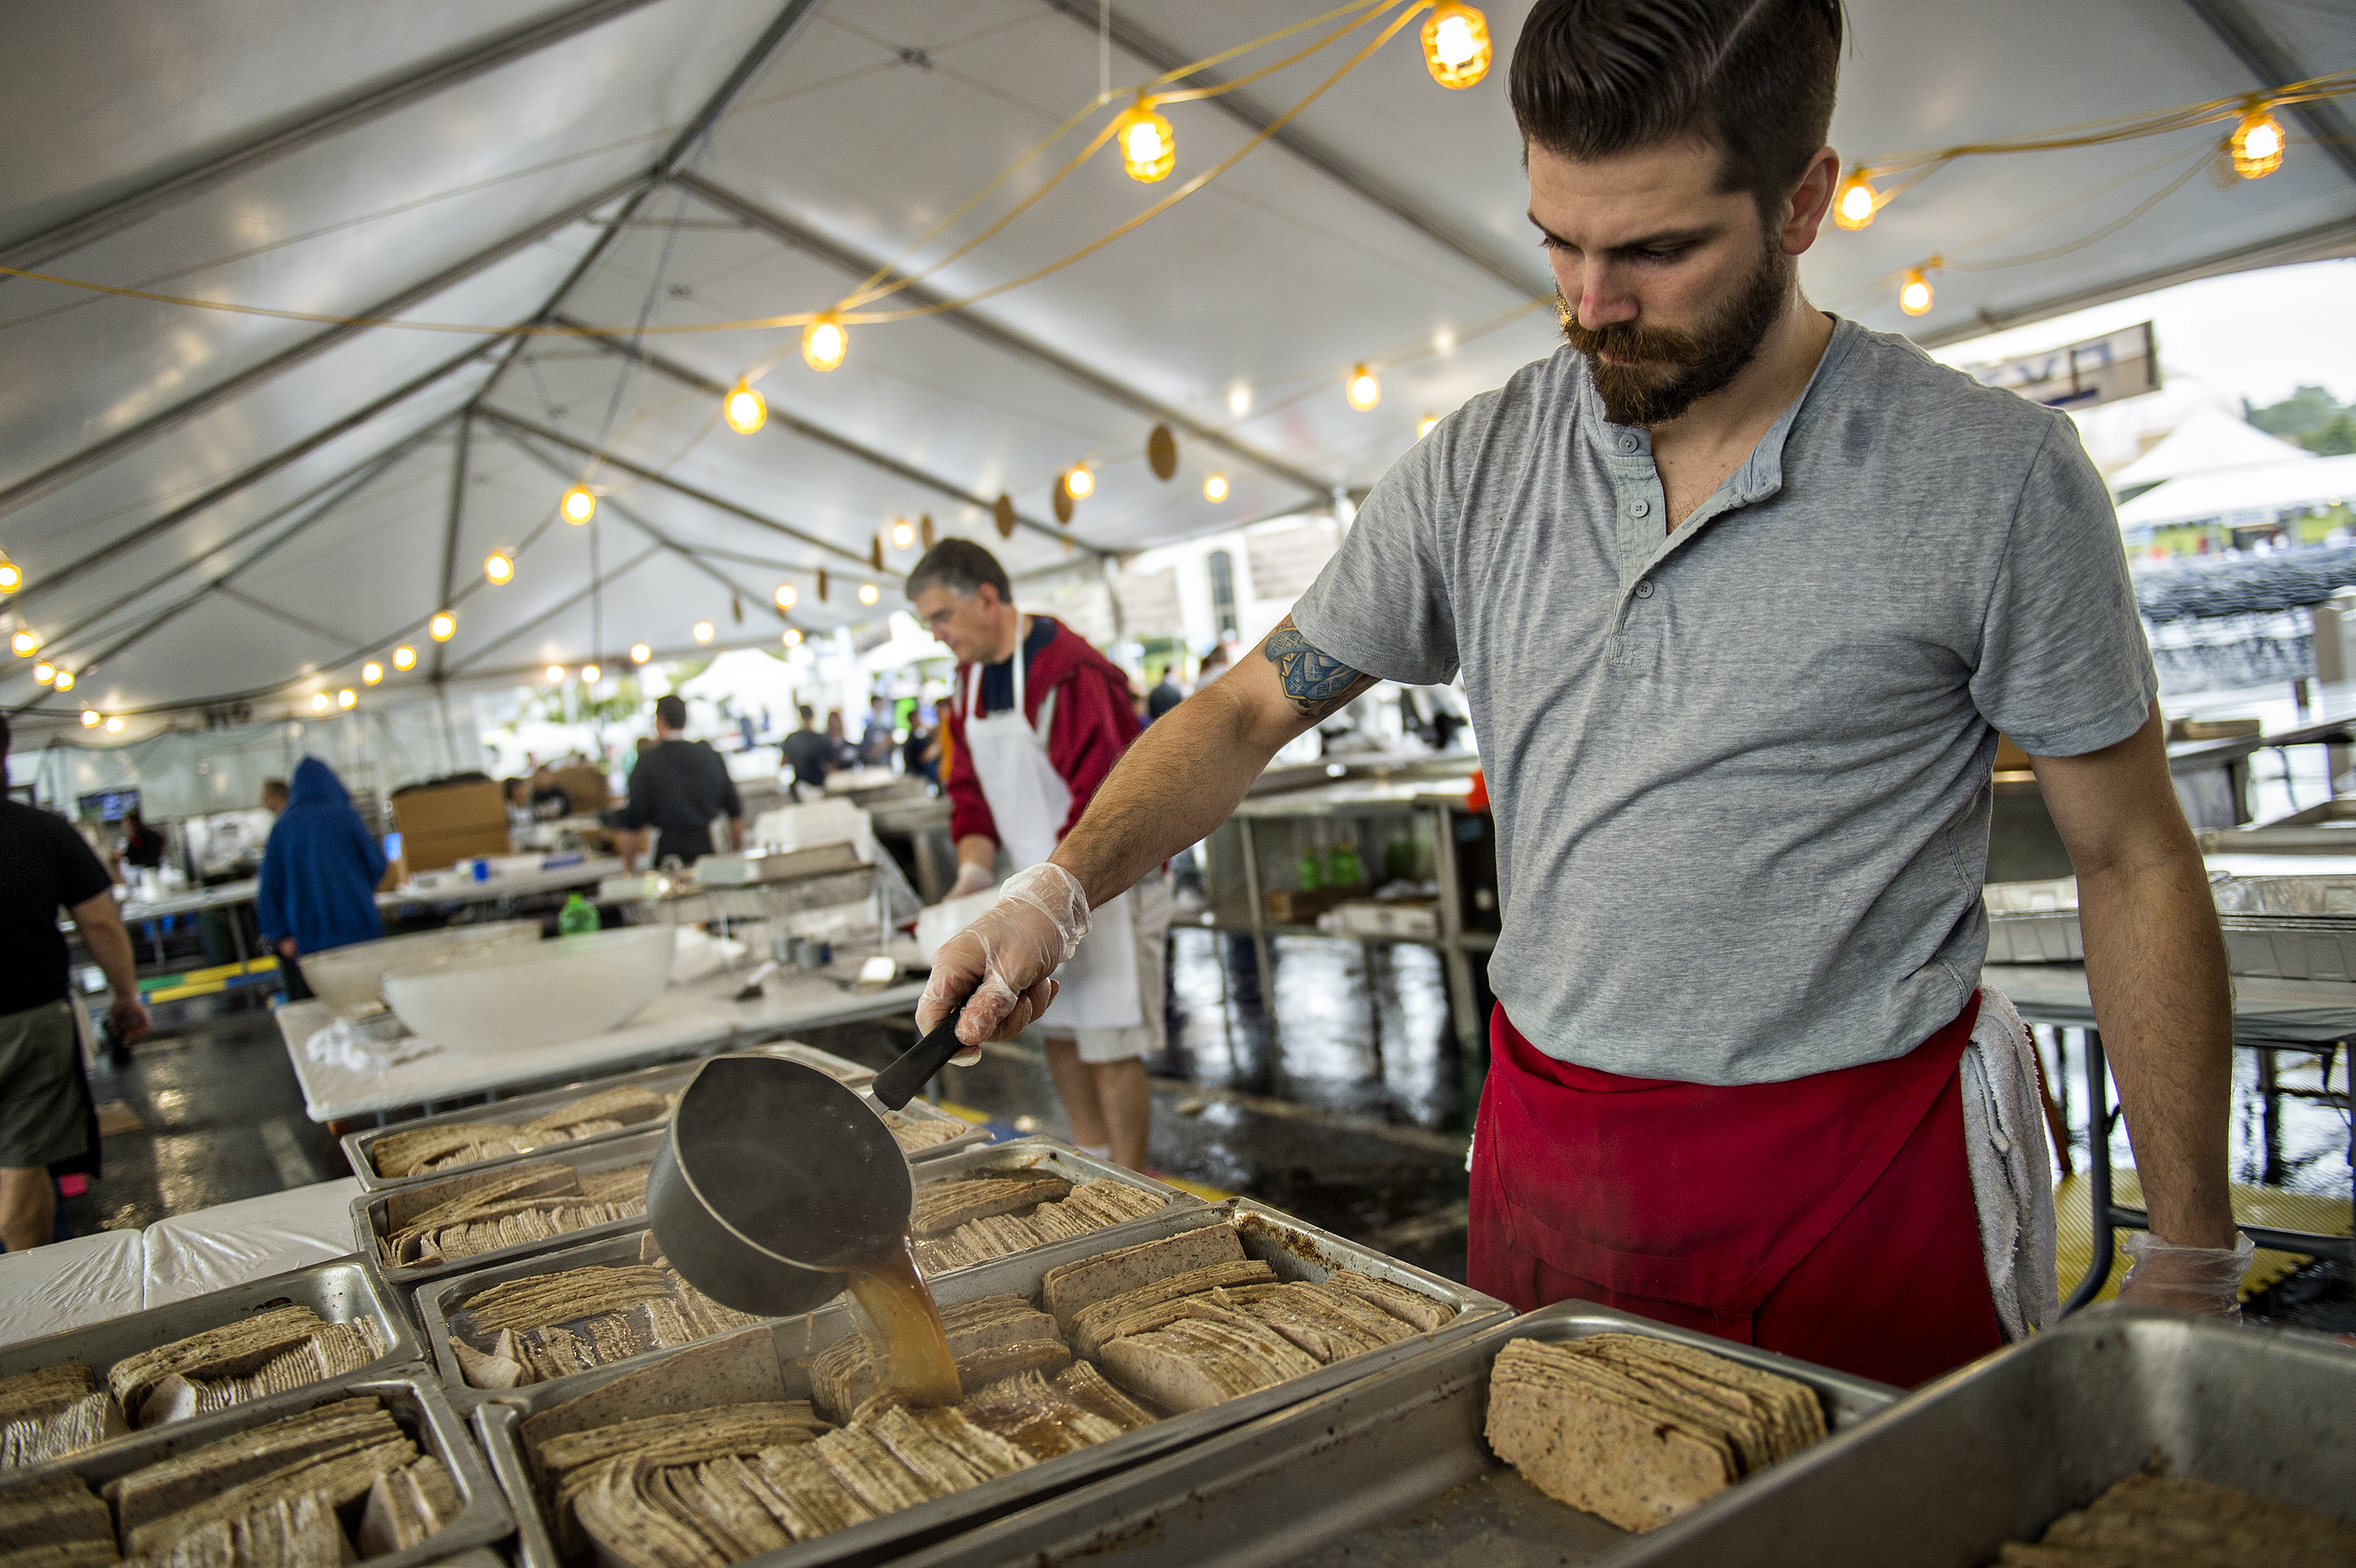 Peter Zakas Jr. marinates gyro meat during the Atlanta Greek Festival at the Greek Orthodox Cathedral of Annunciation on Saturday, September 26, 2015.